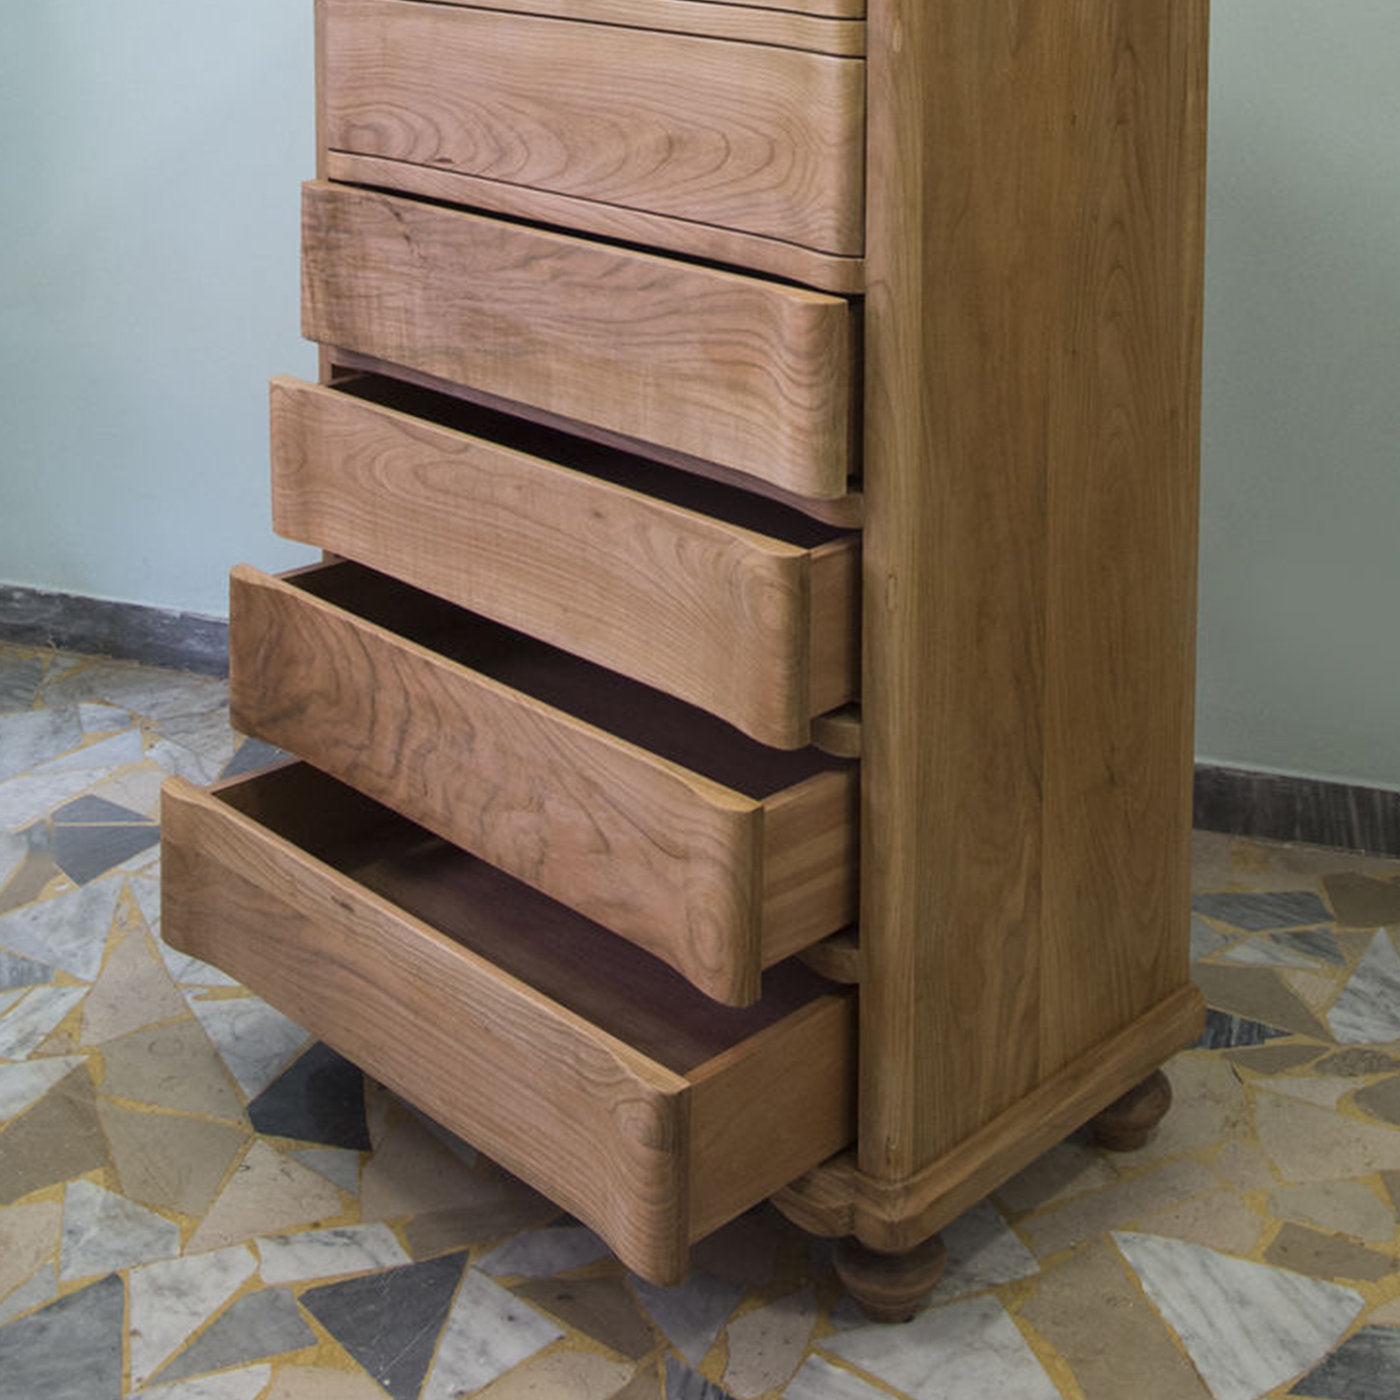 Eugenio Chest of Drawers by Erika Gambella - Alternative view 1